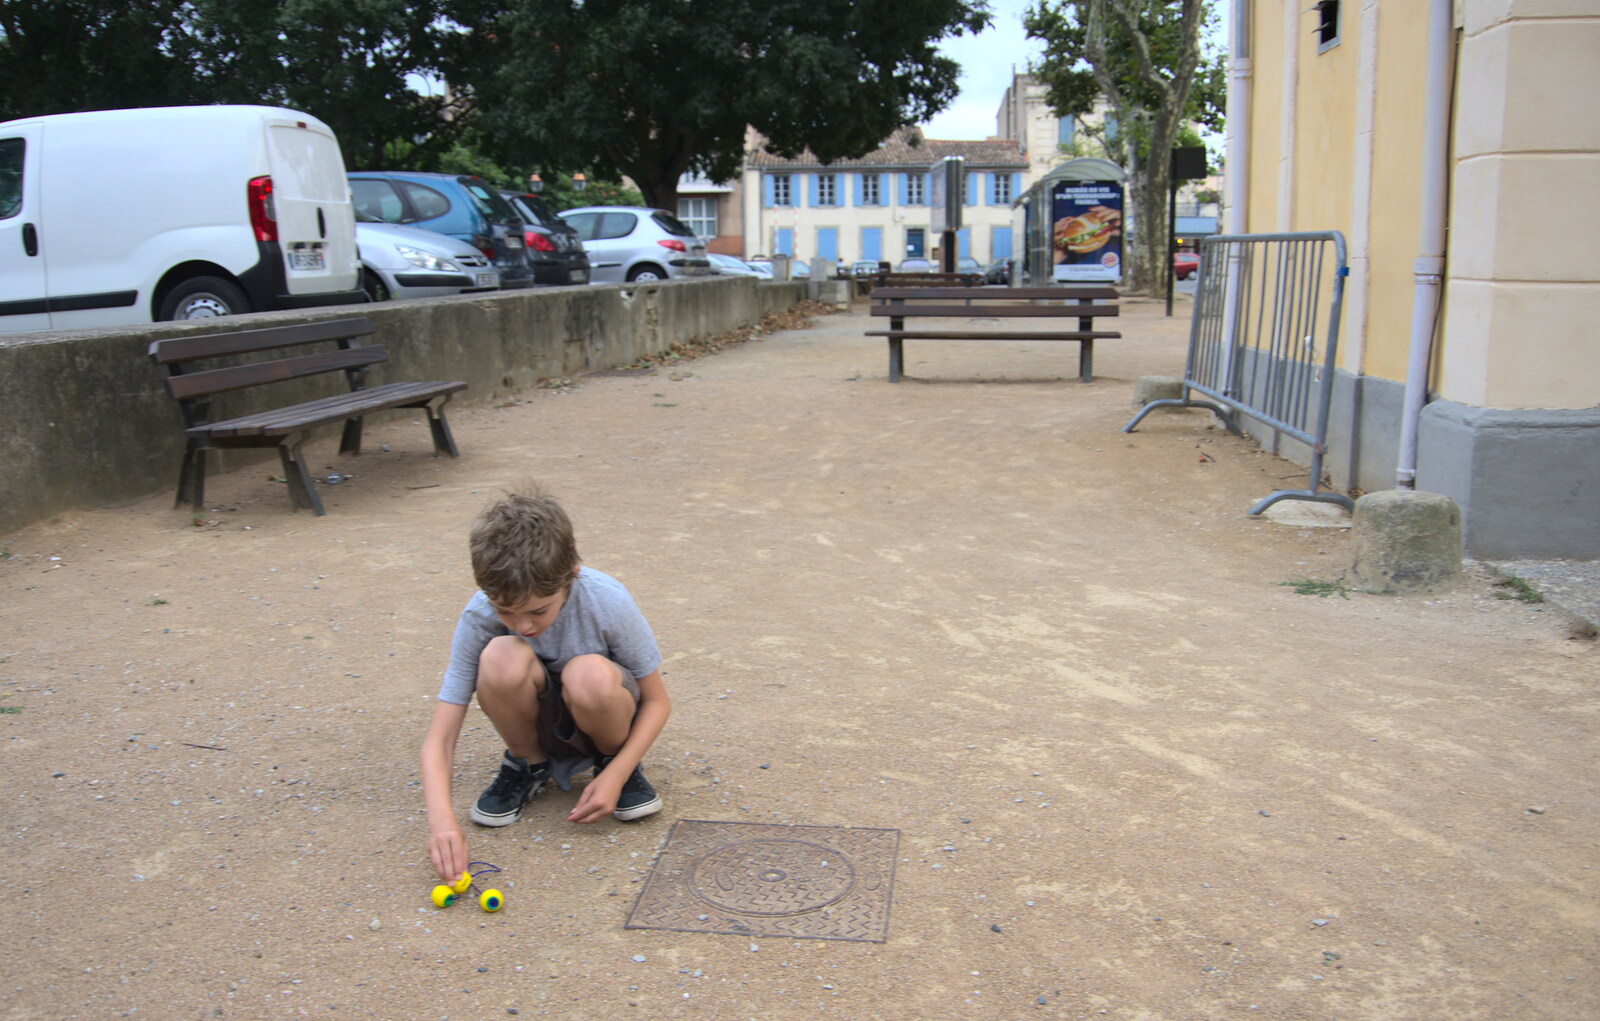 Fred plays with his jacks outside from A Trip to Carcassonne, Aude, France - 8th August 2018